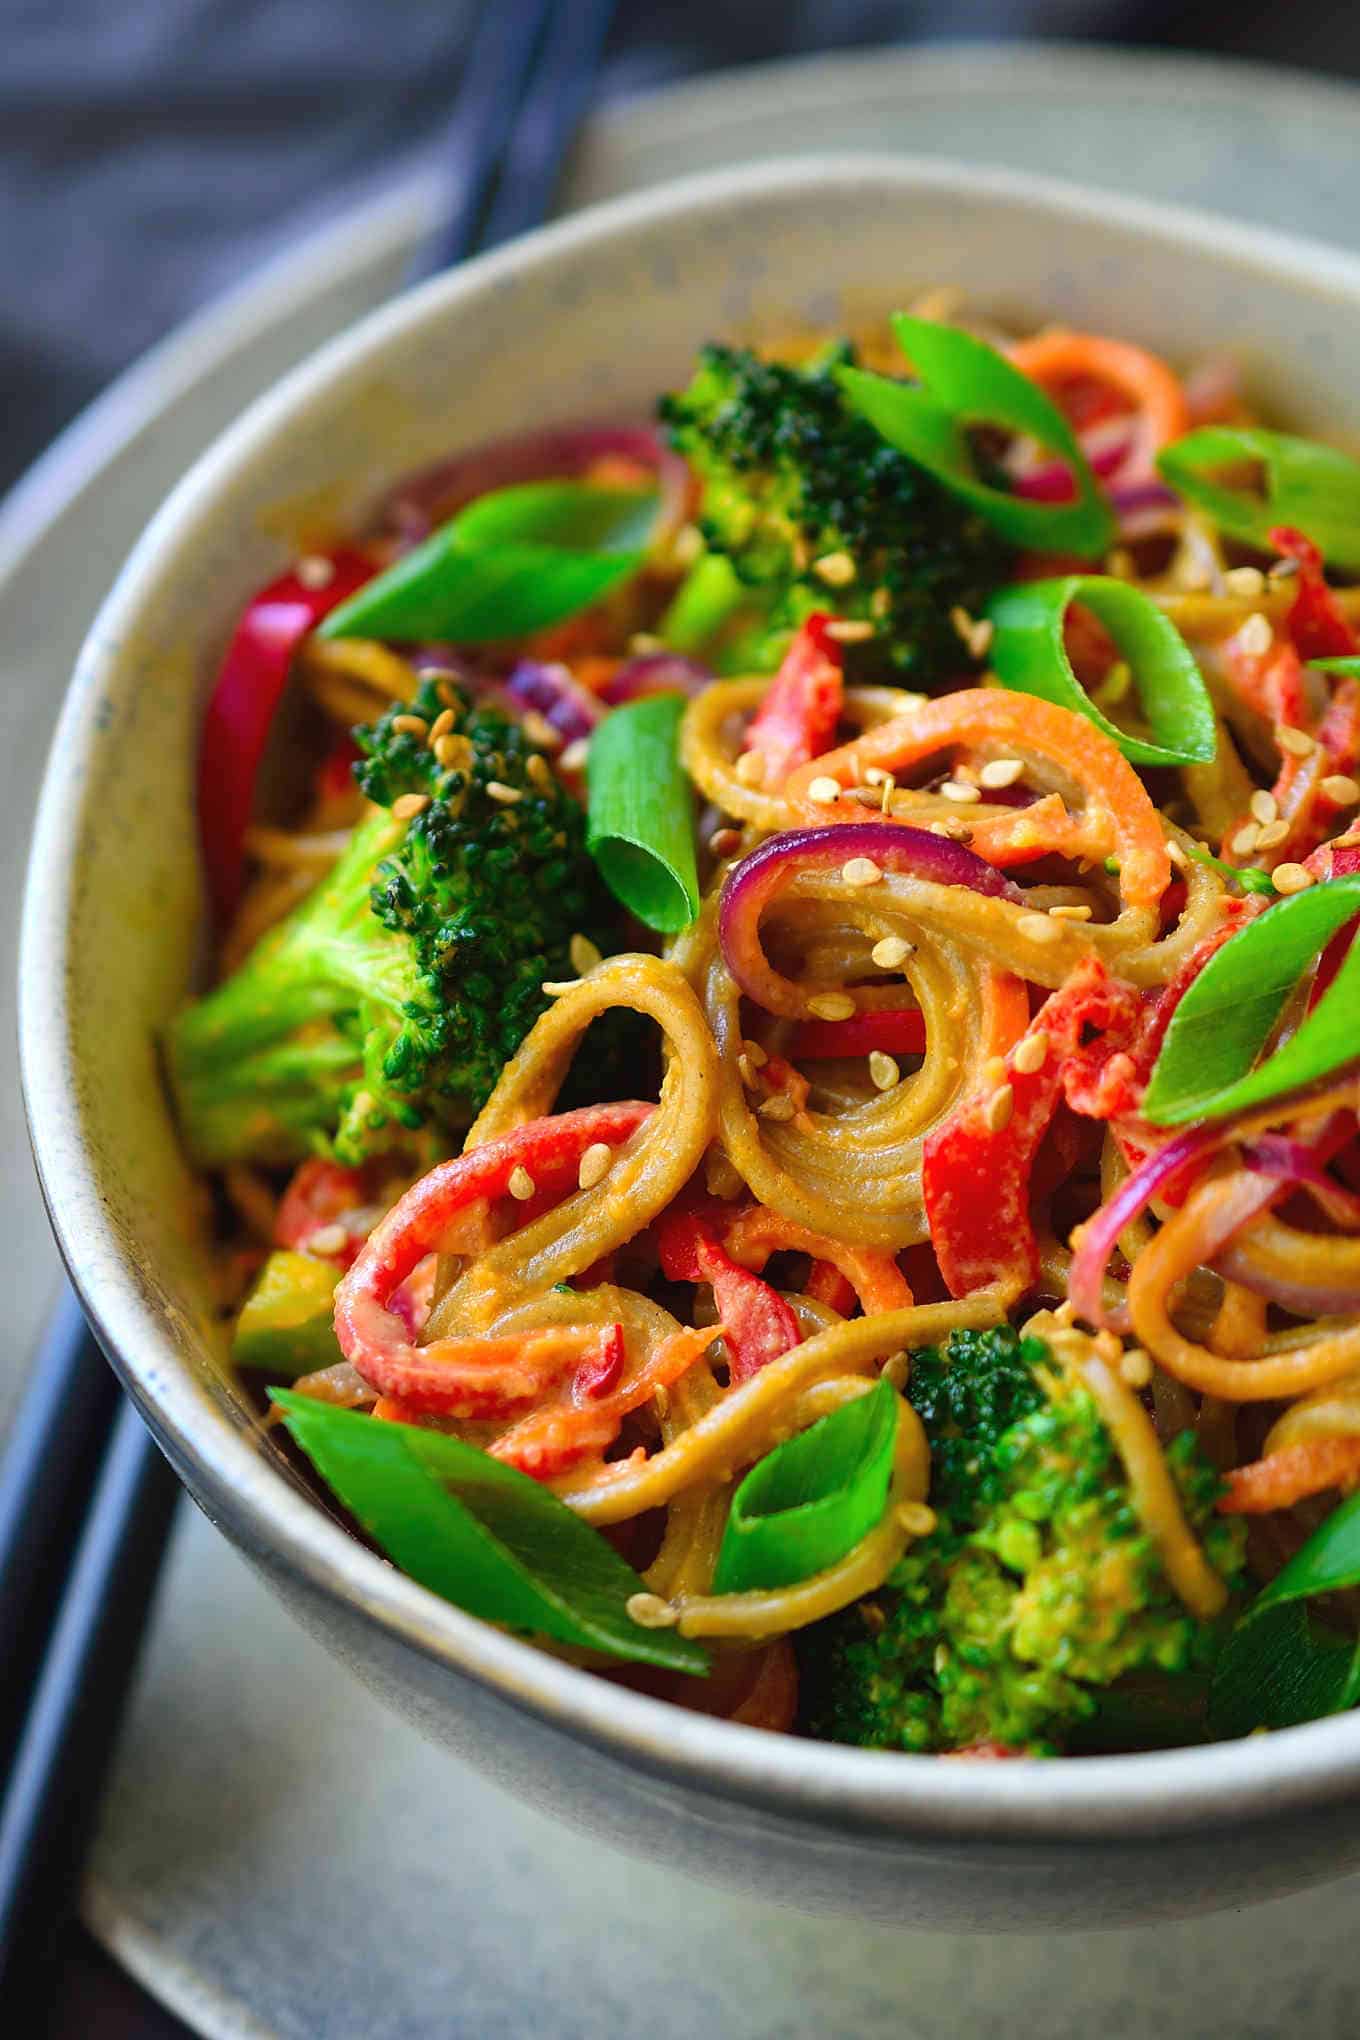 These almond butter noodles are deliciously creamy, quick and easy to make, and packed with a rainbow of veggies. I used soba noodles for this vegan recipe but it works equally well with udon, rice noodles, zoodles or even simple spaghetti.